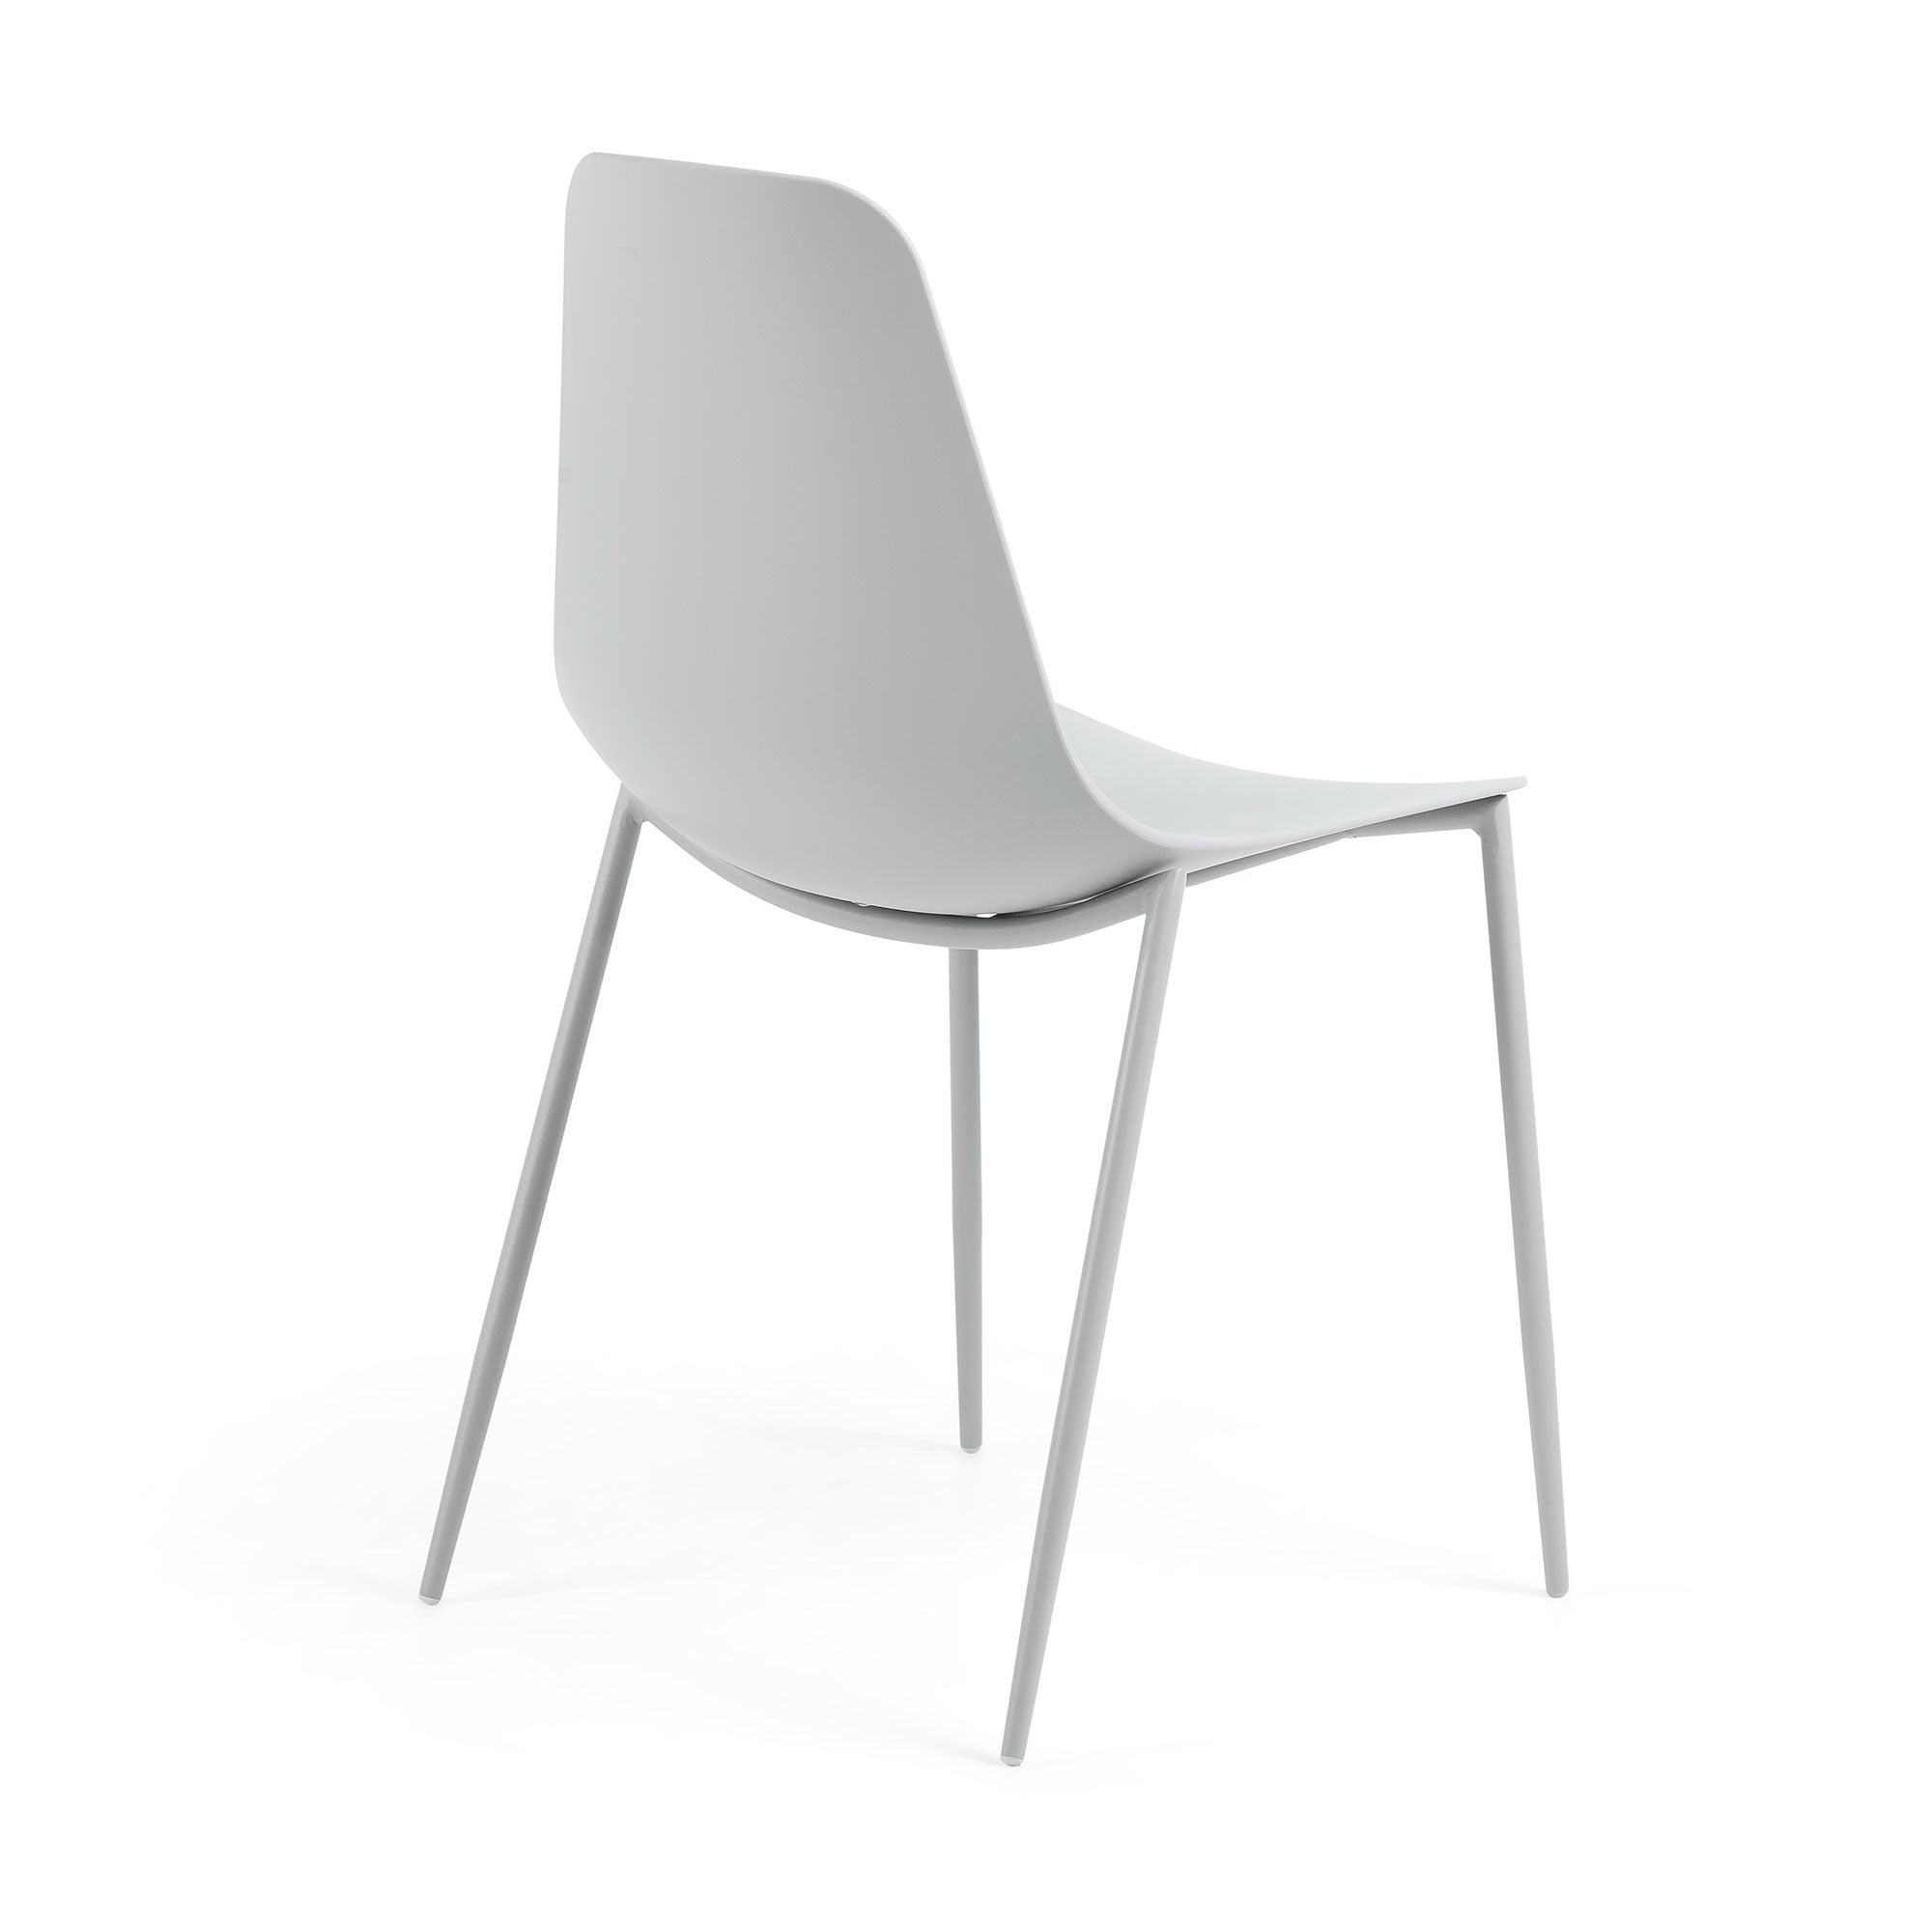 Whatts chair in grey with steel legs